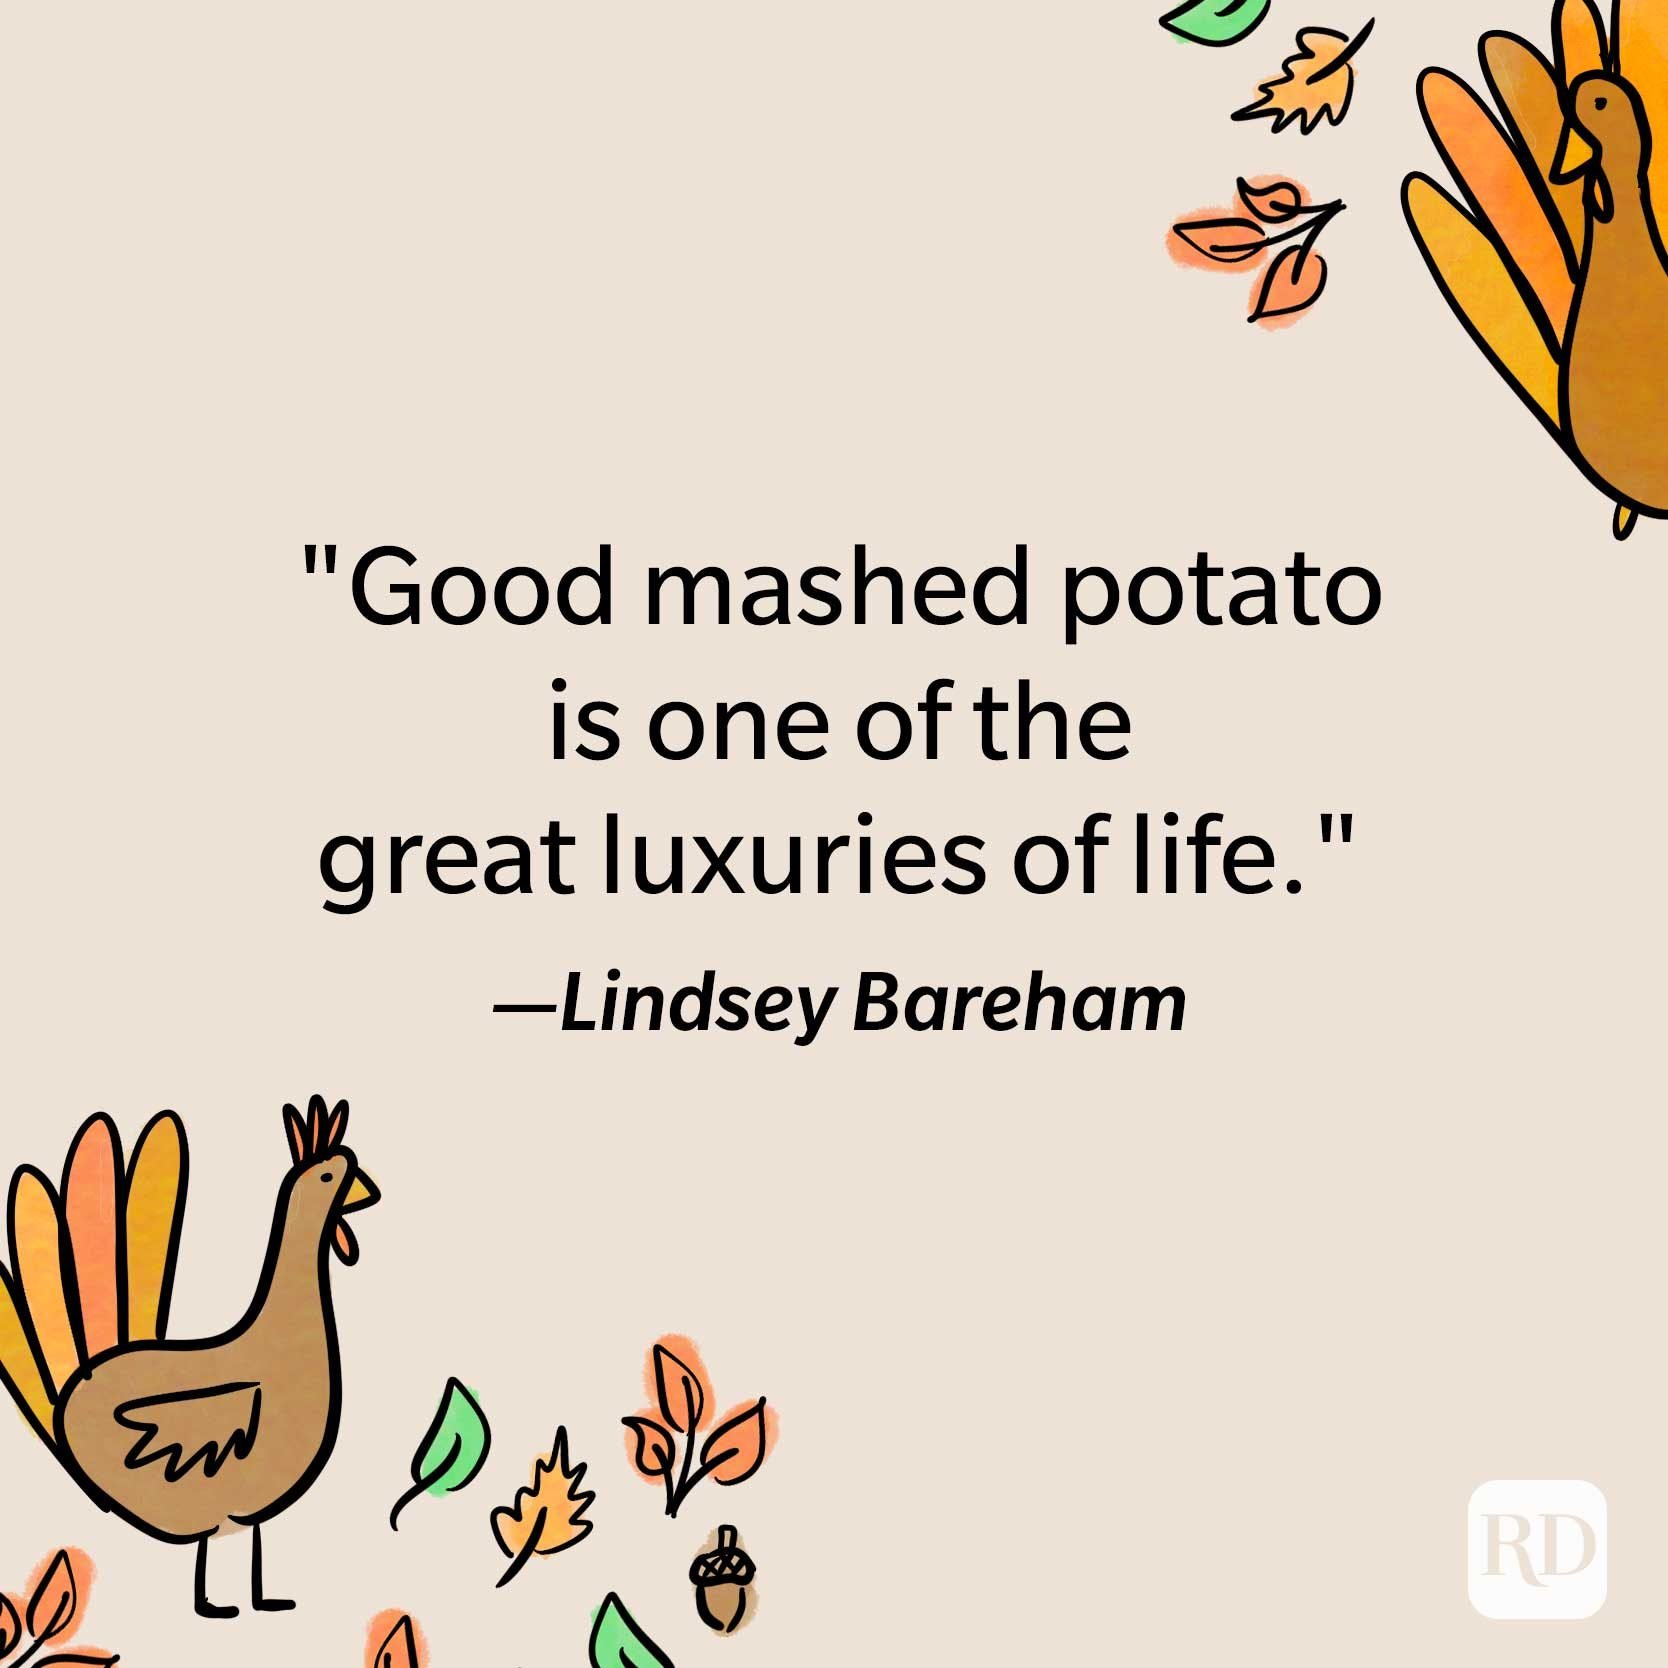 Funny Thanksgiving Quotes to Share at the Table | Reader's ...